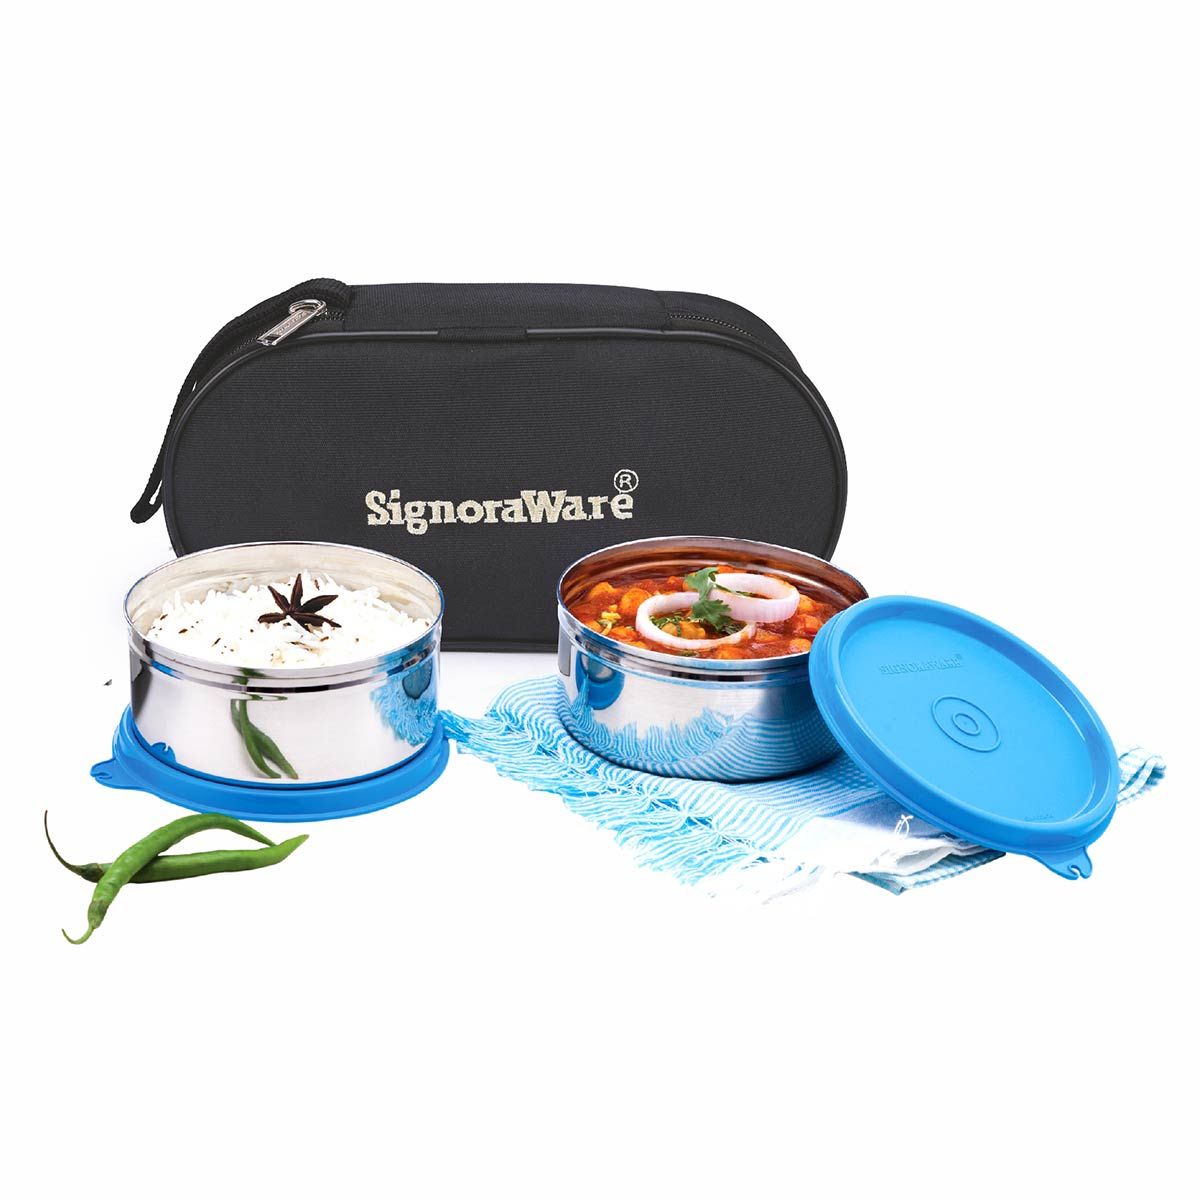 Signoraware Midday Maxx Fresh Steel Stainless Steel Lunch Box with Bag